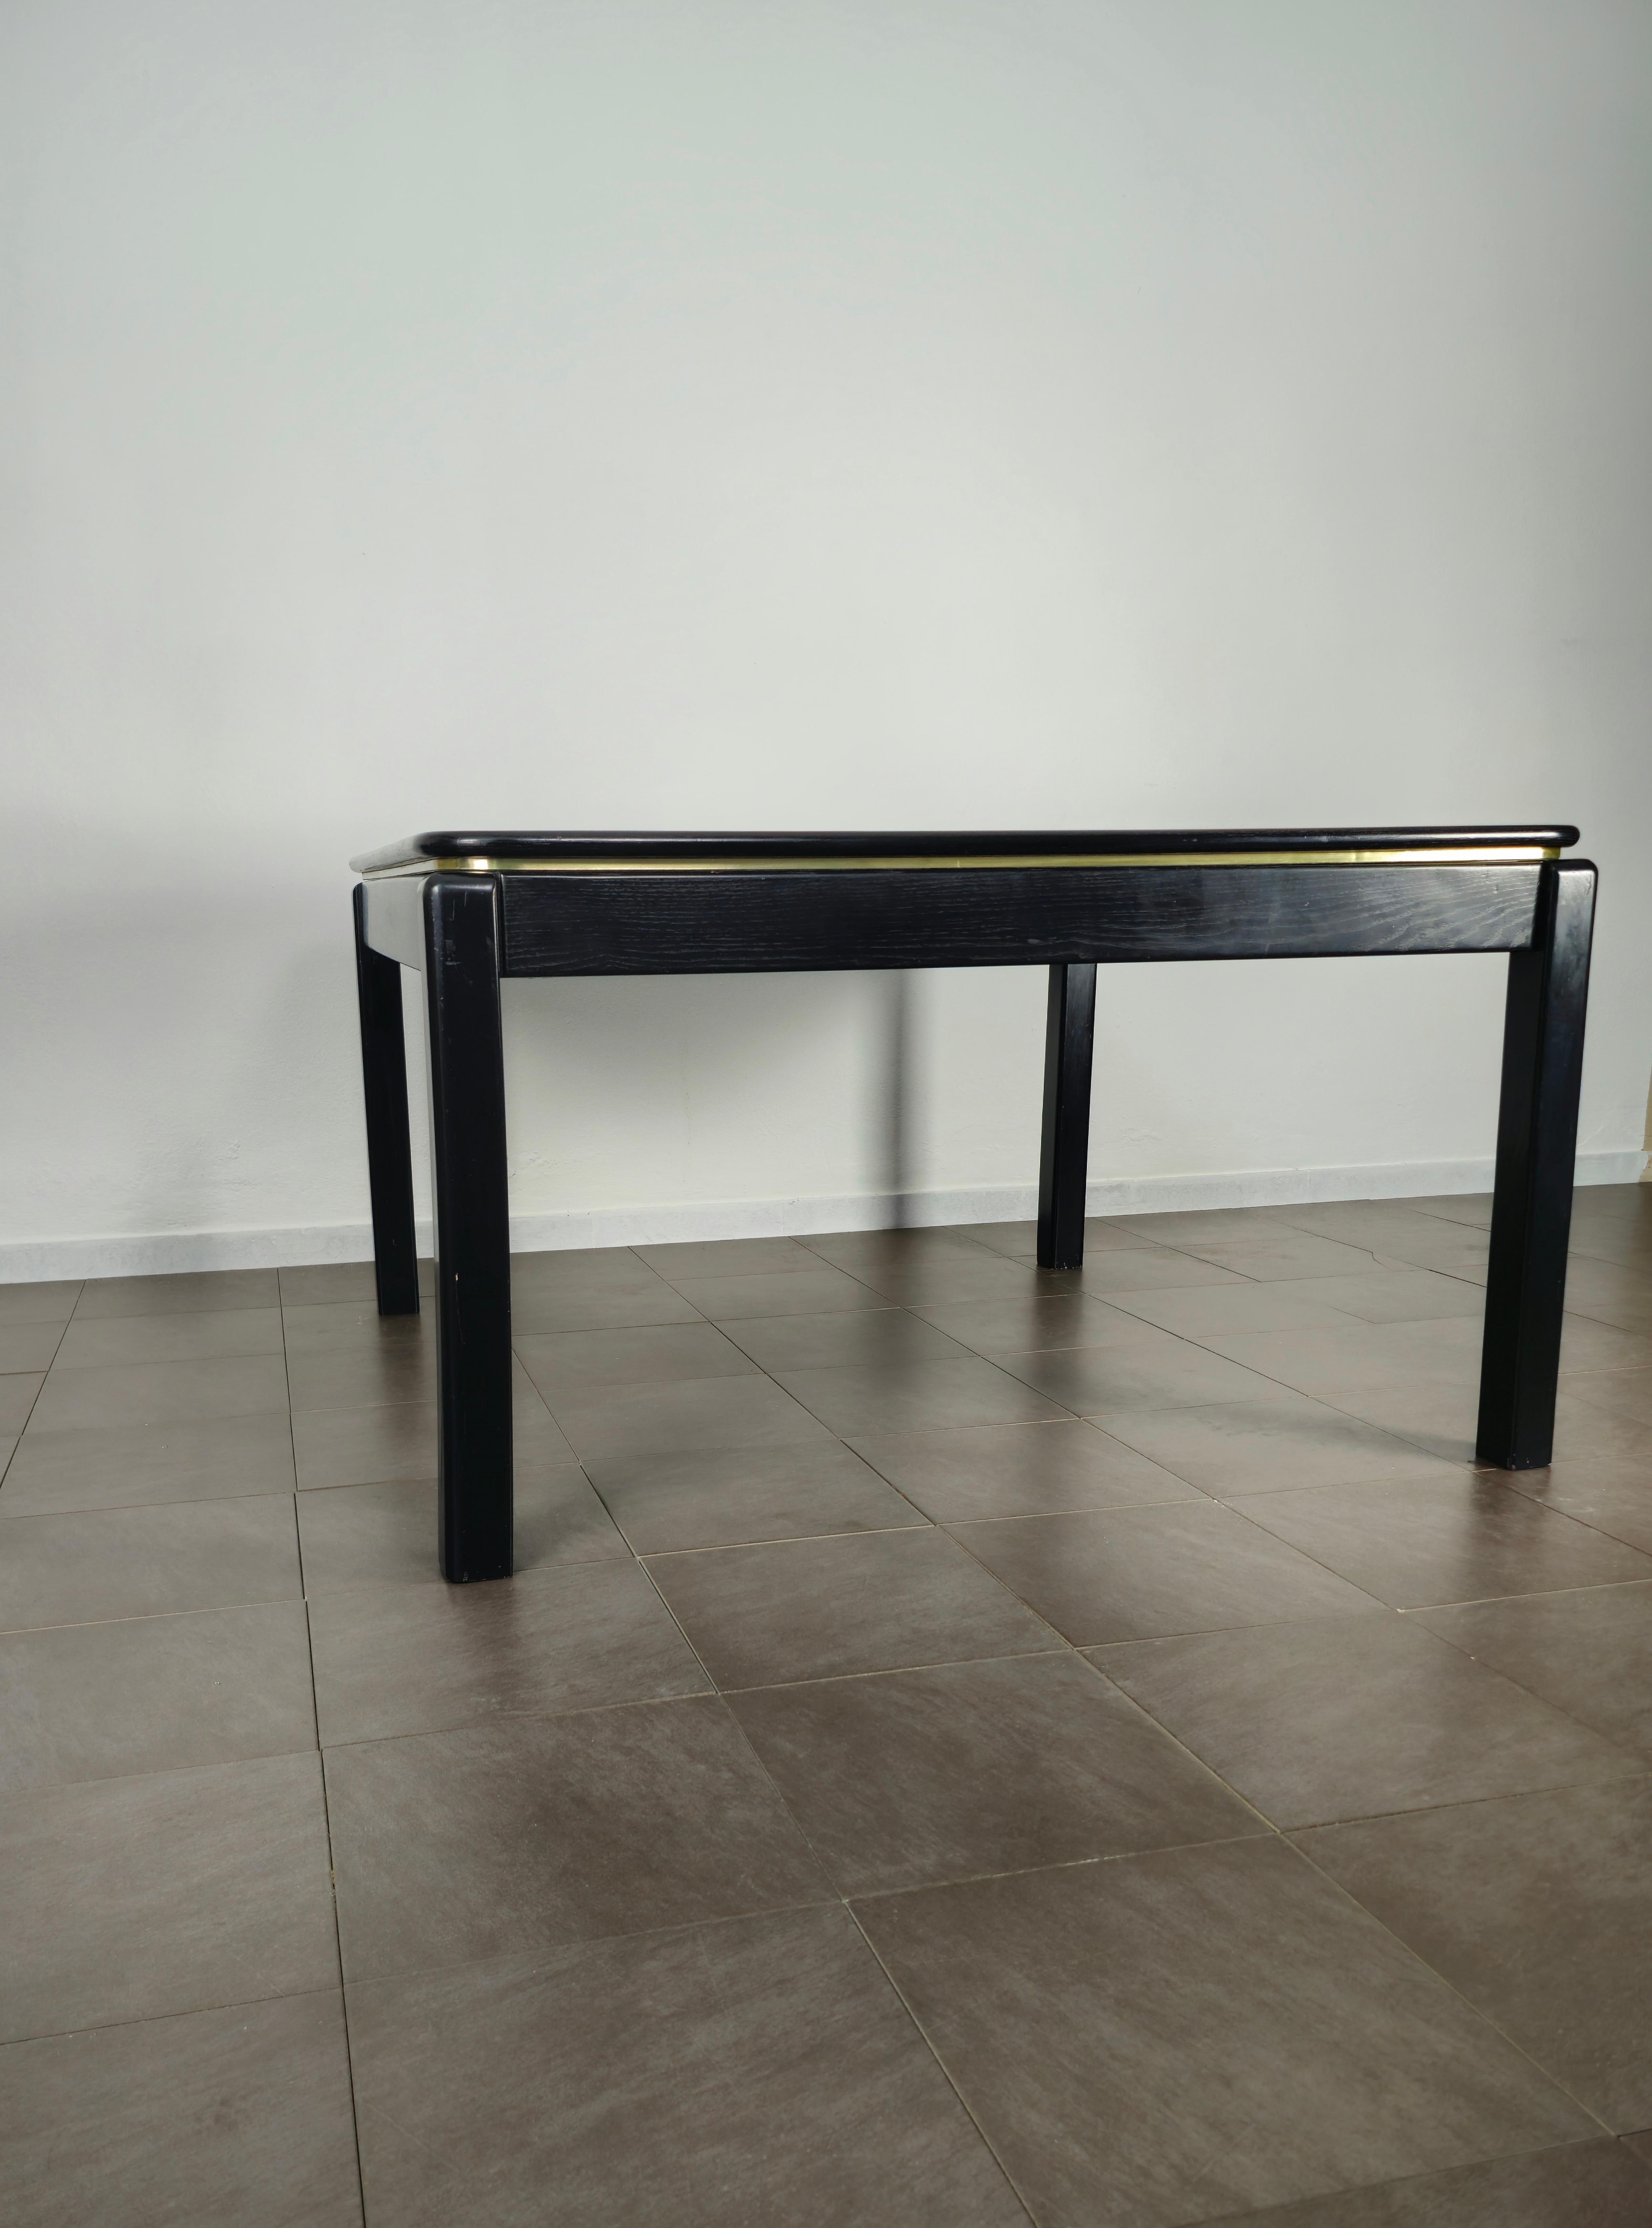 Dining Room Table Wood Enamelled Black Anodized Aluminum Midcentury, Italy 1970s In Fair Condition For Sale In Palermo, IT